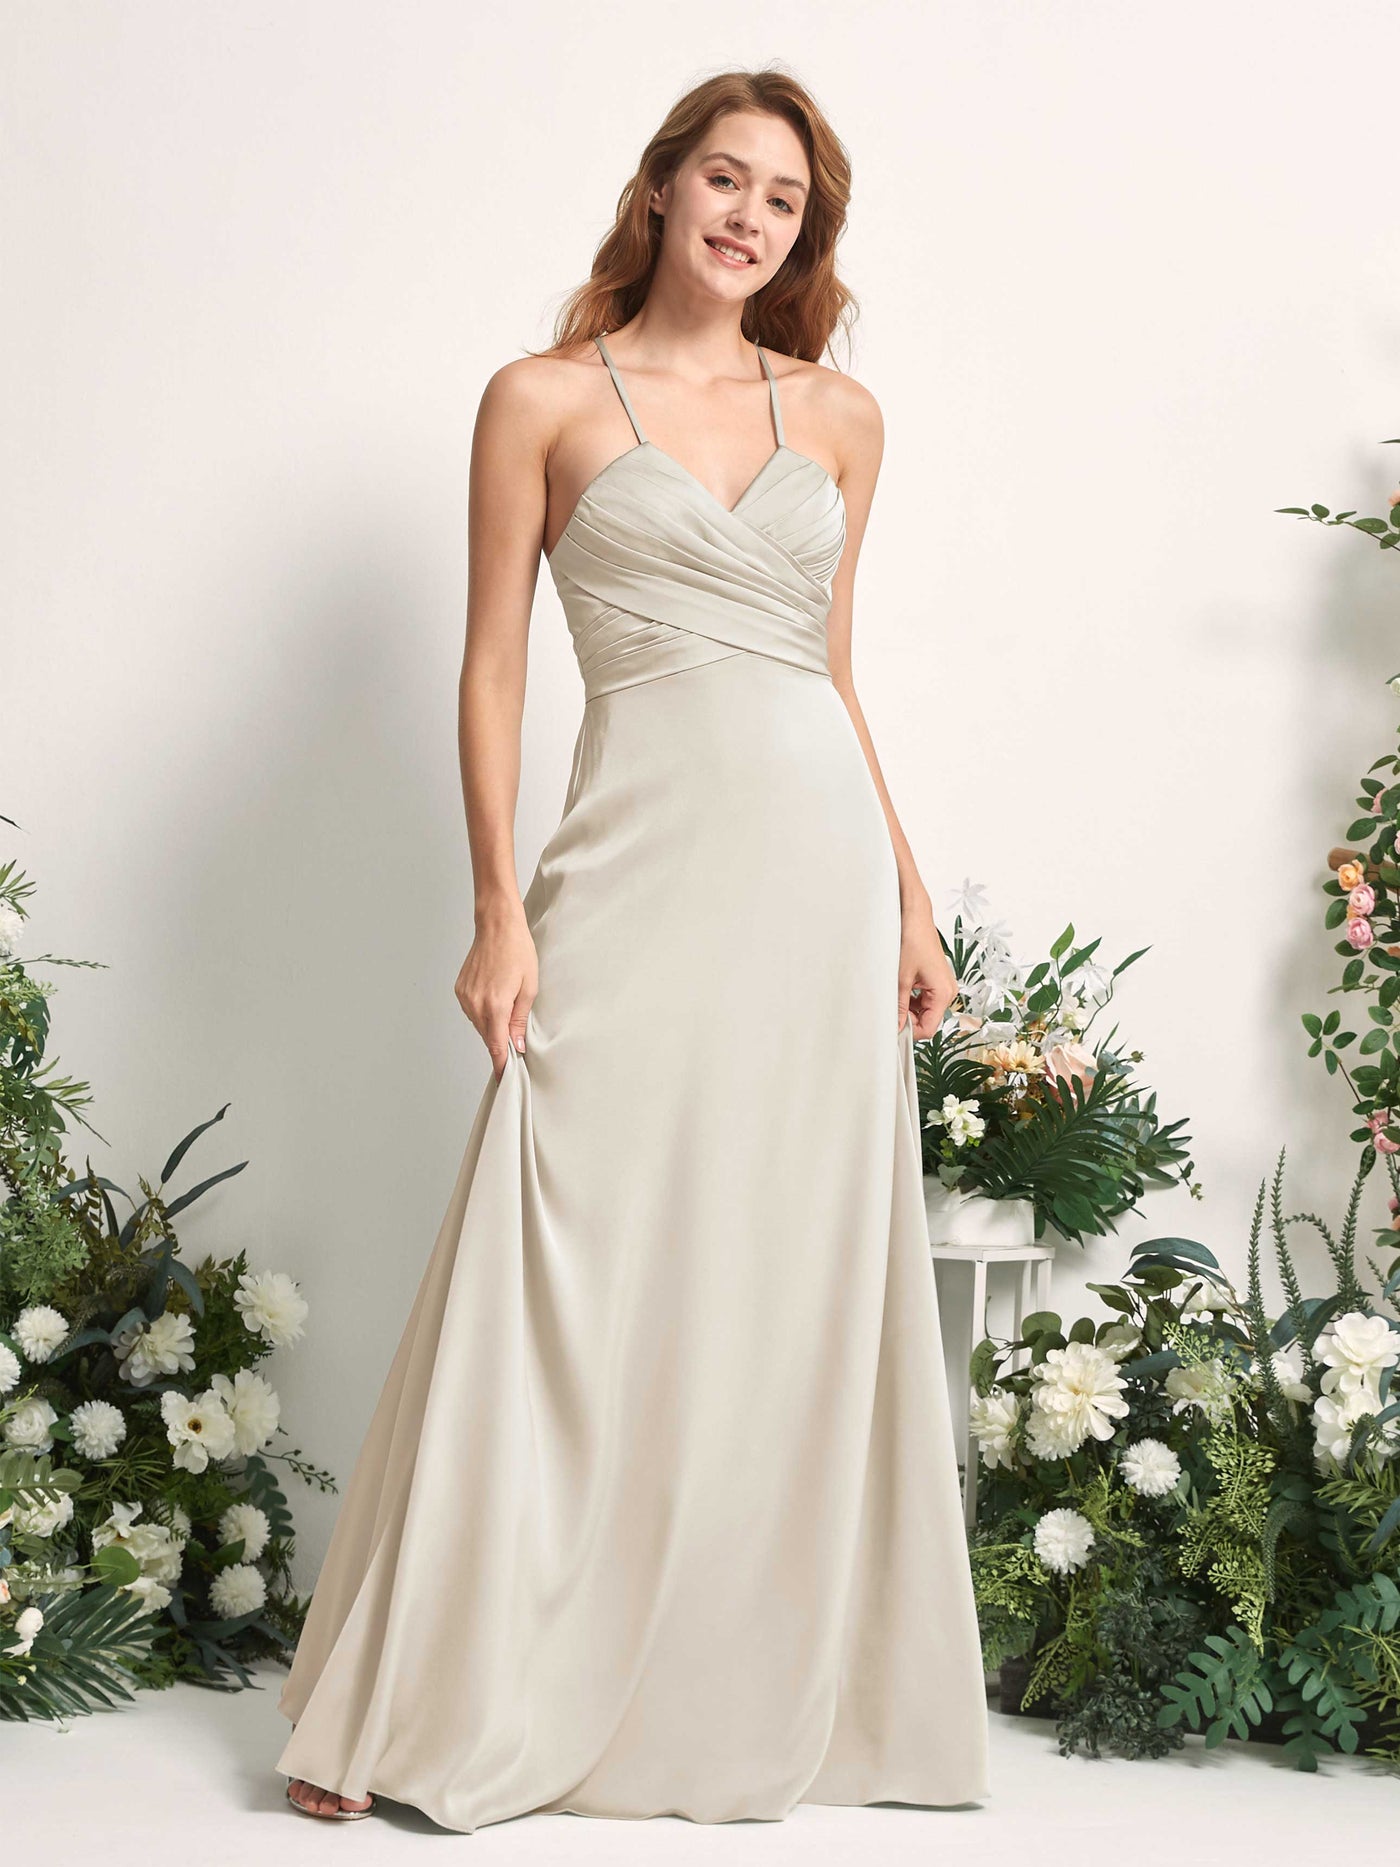 Champagne Bridesmaid Dresses Bridesmaid Dress A-line Satin Spaghetti-straps Full Length Sleeveless Wedding Party Dress (80225704)#color_champagne